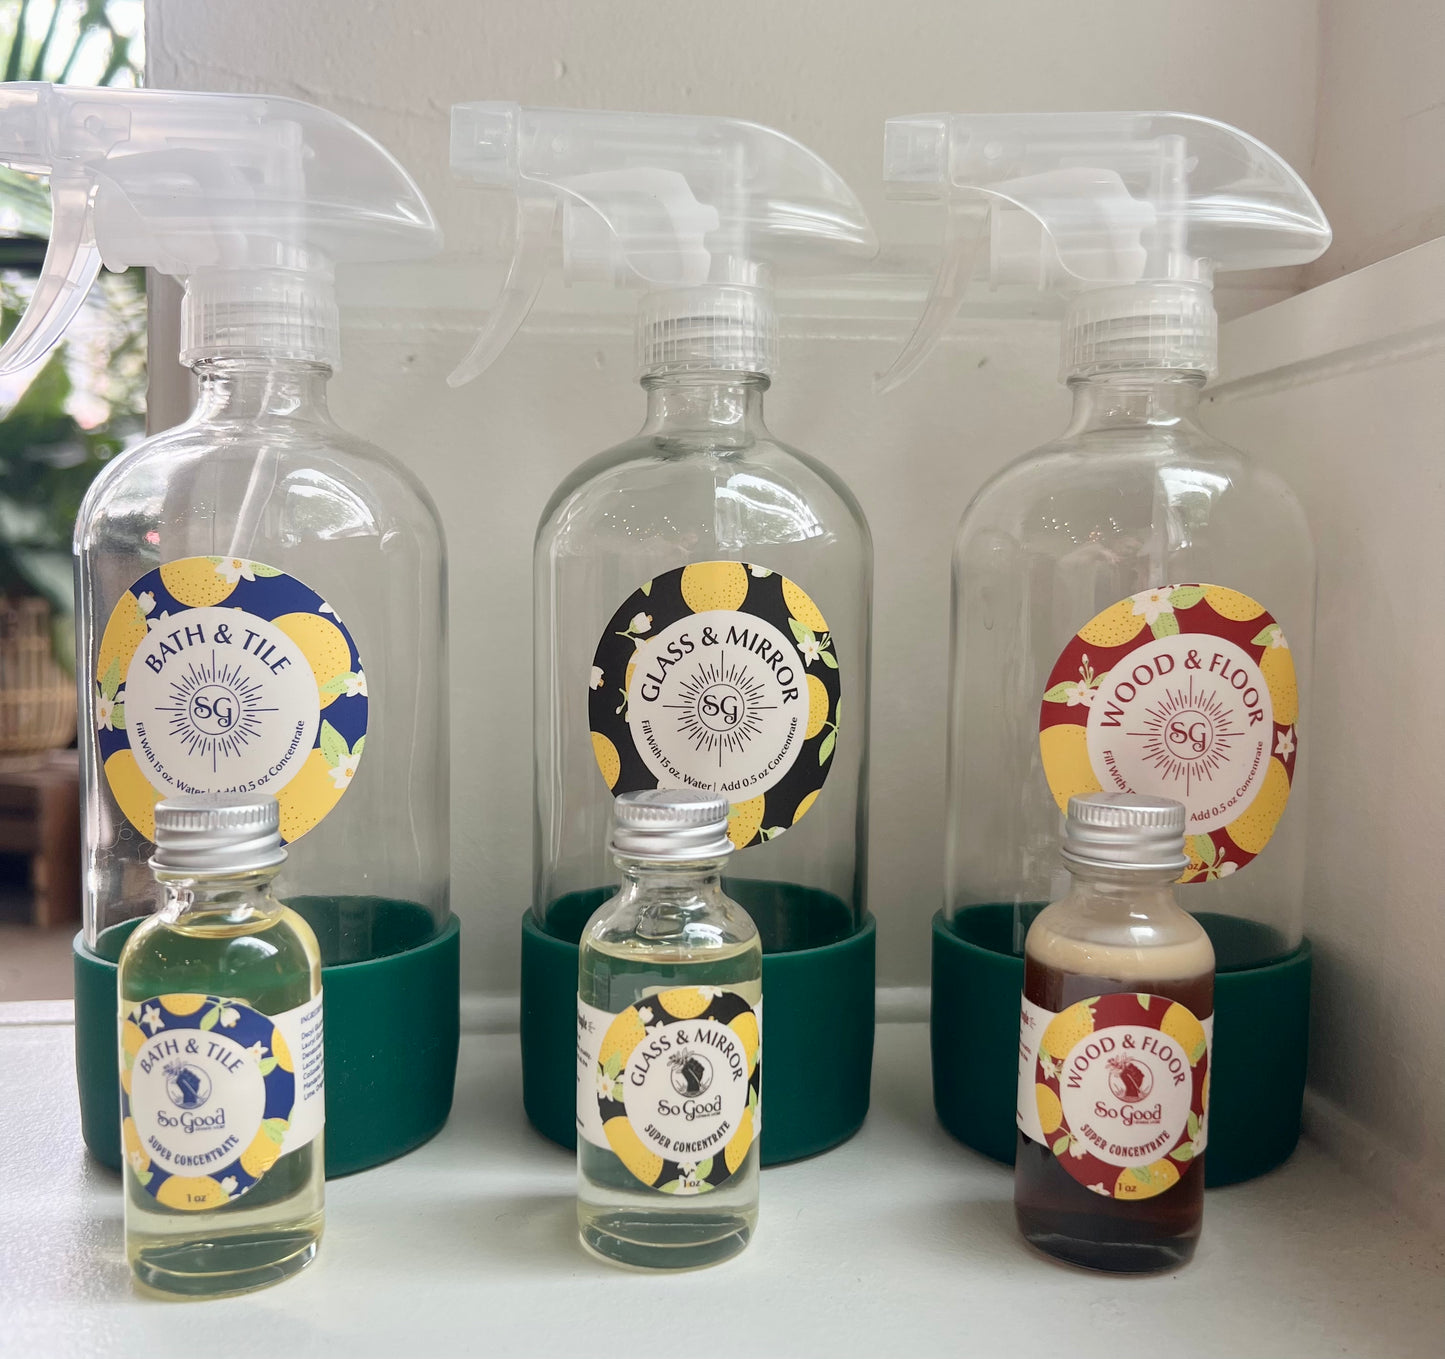 Cleaning Concentrate + Reusable Glass Spray Bottle